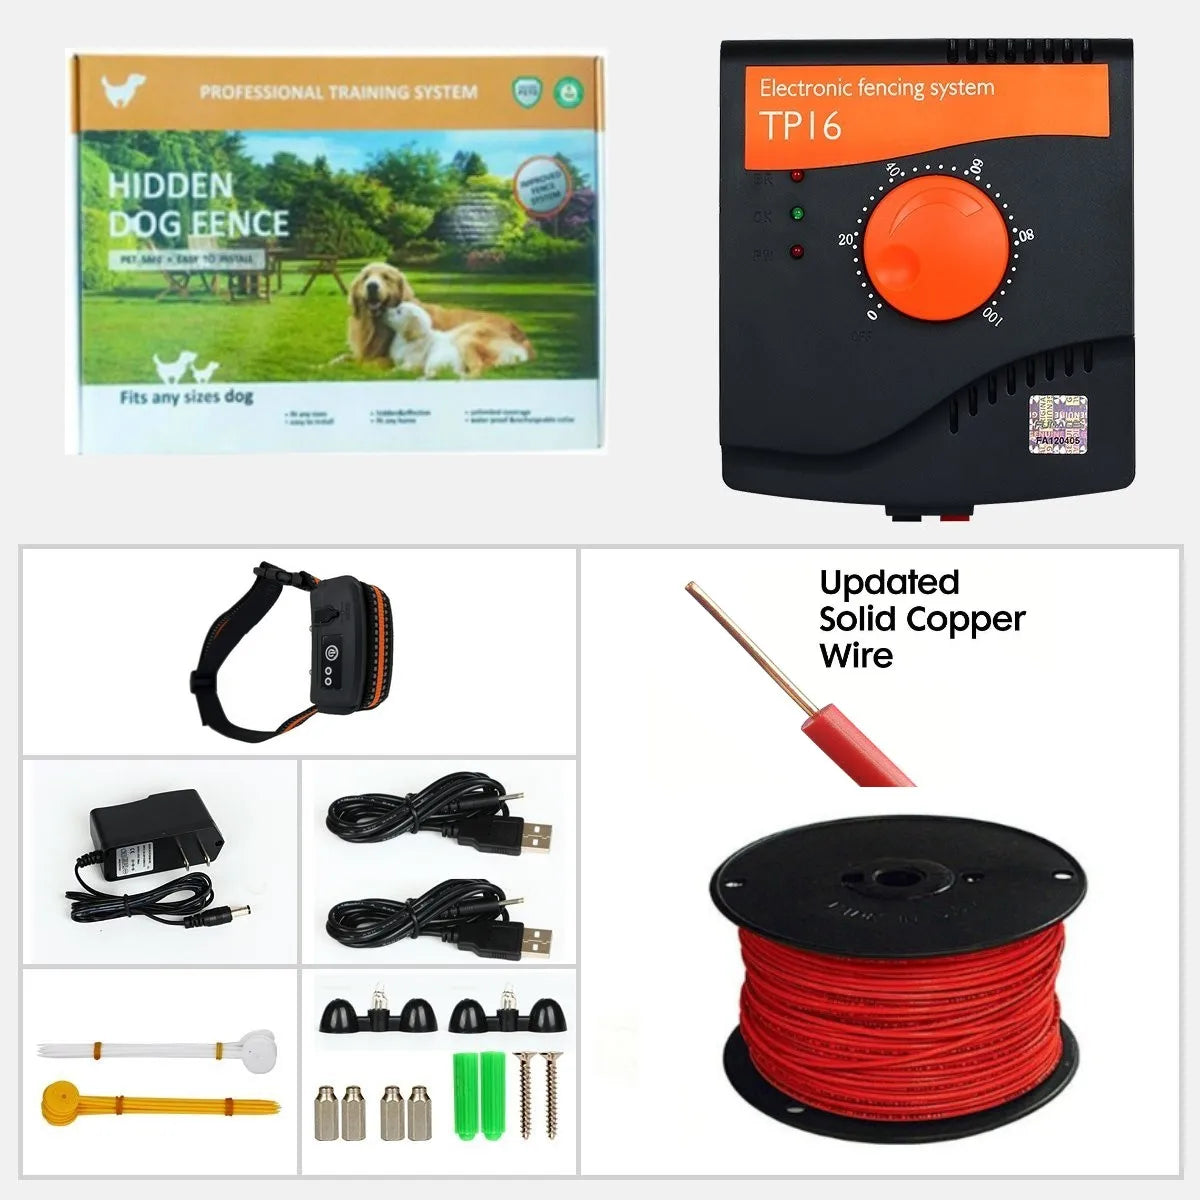 TP16 Pet Fence System with Rechargeable Waterproof Training Collar